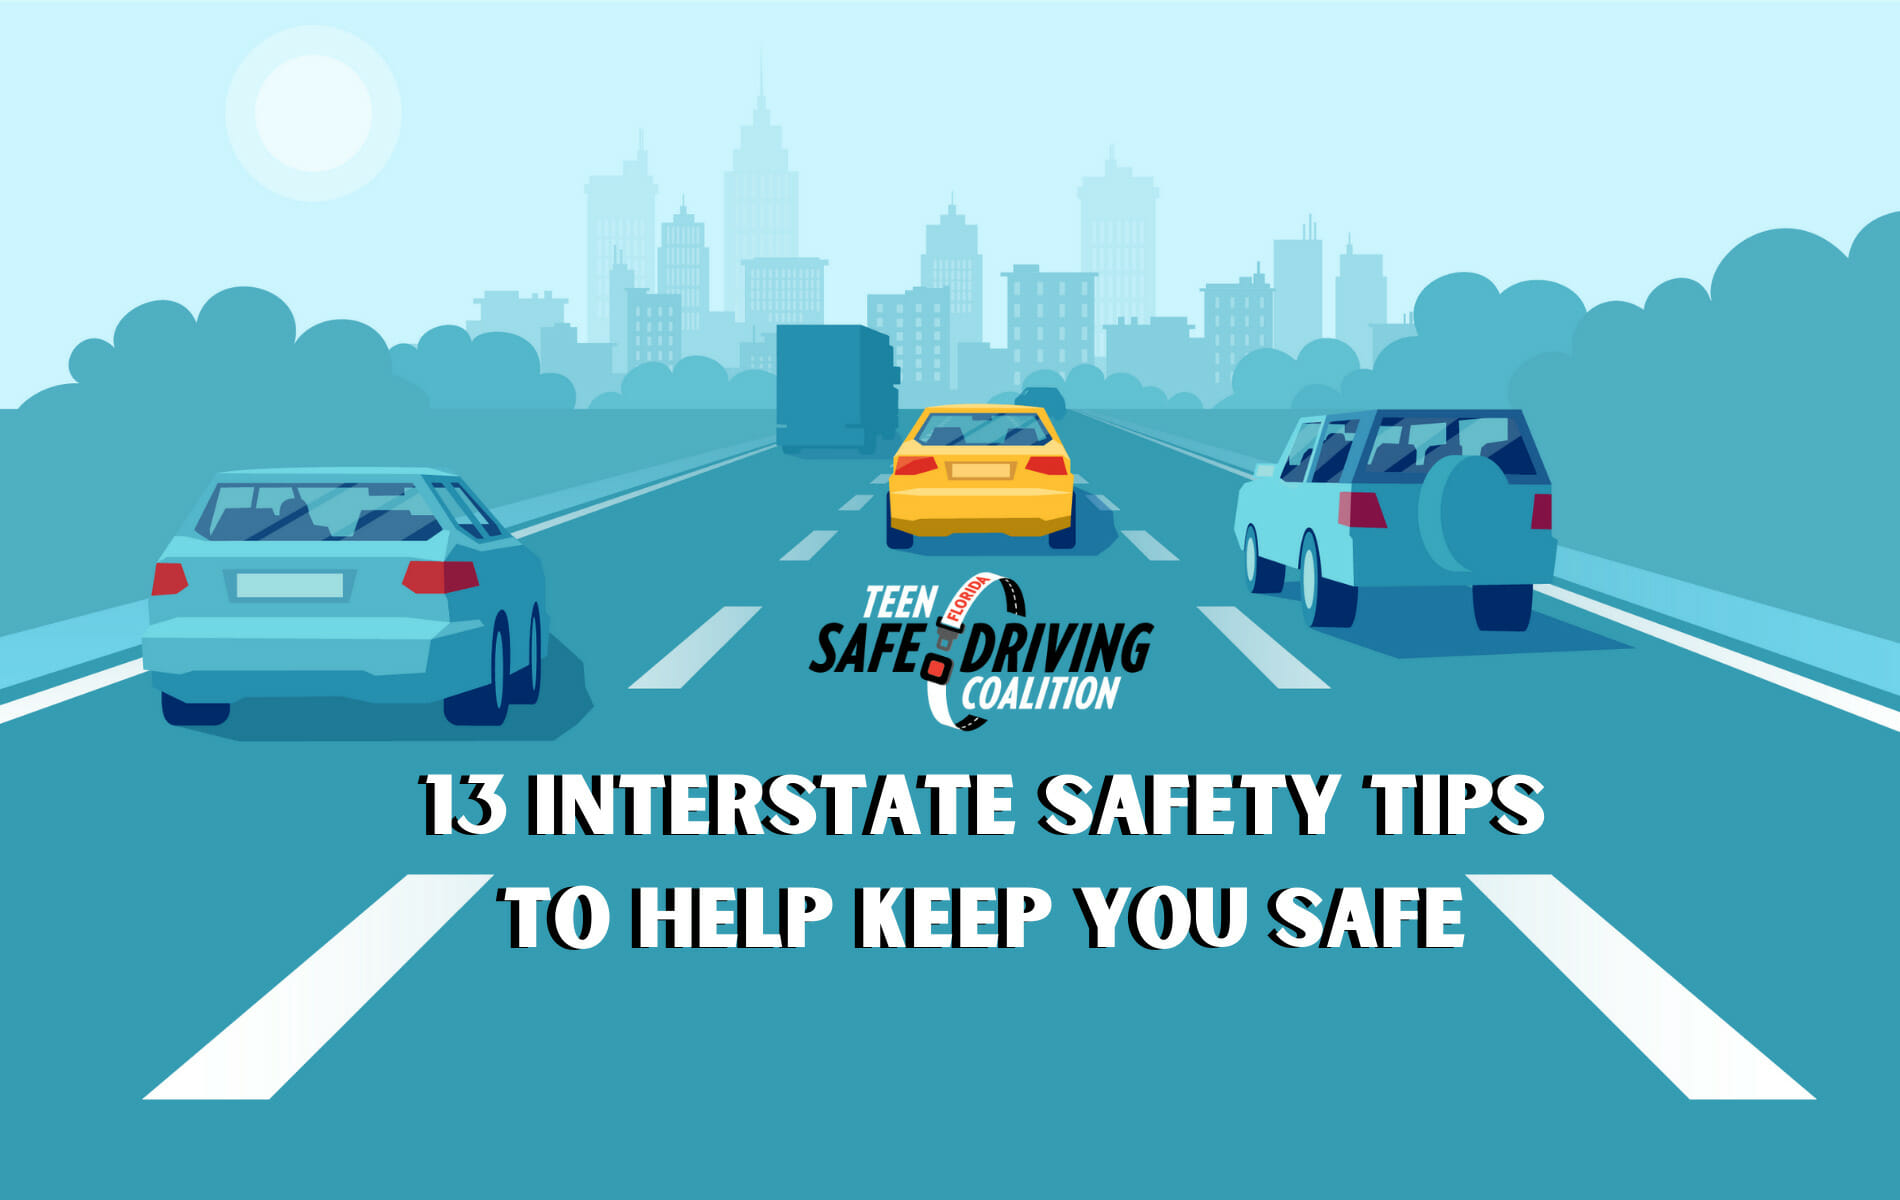 13 Interstate Safety Tips to Help Keep You Safe